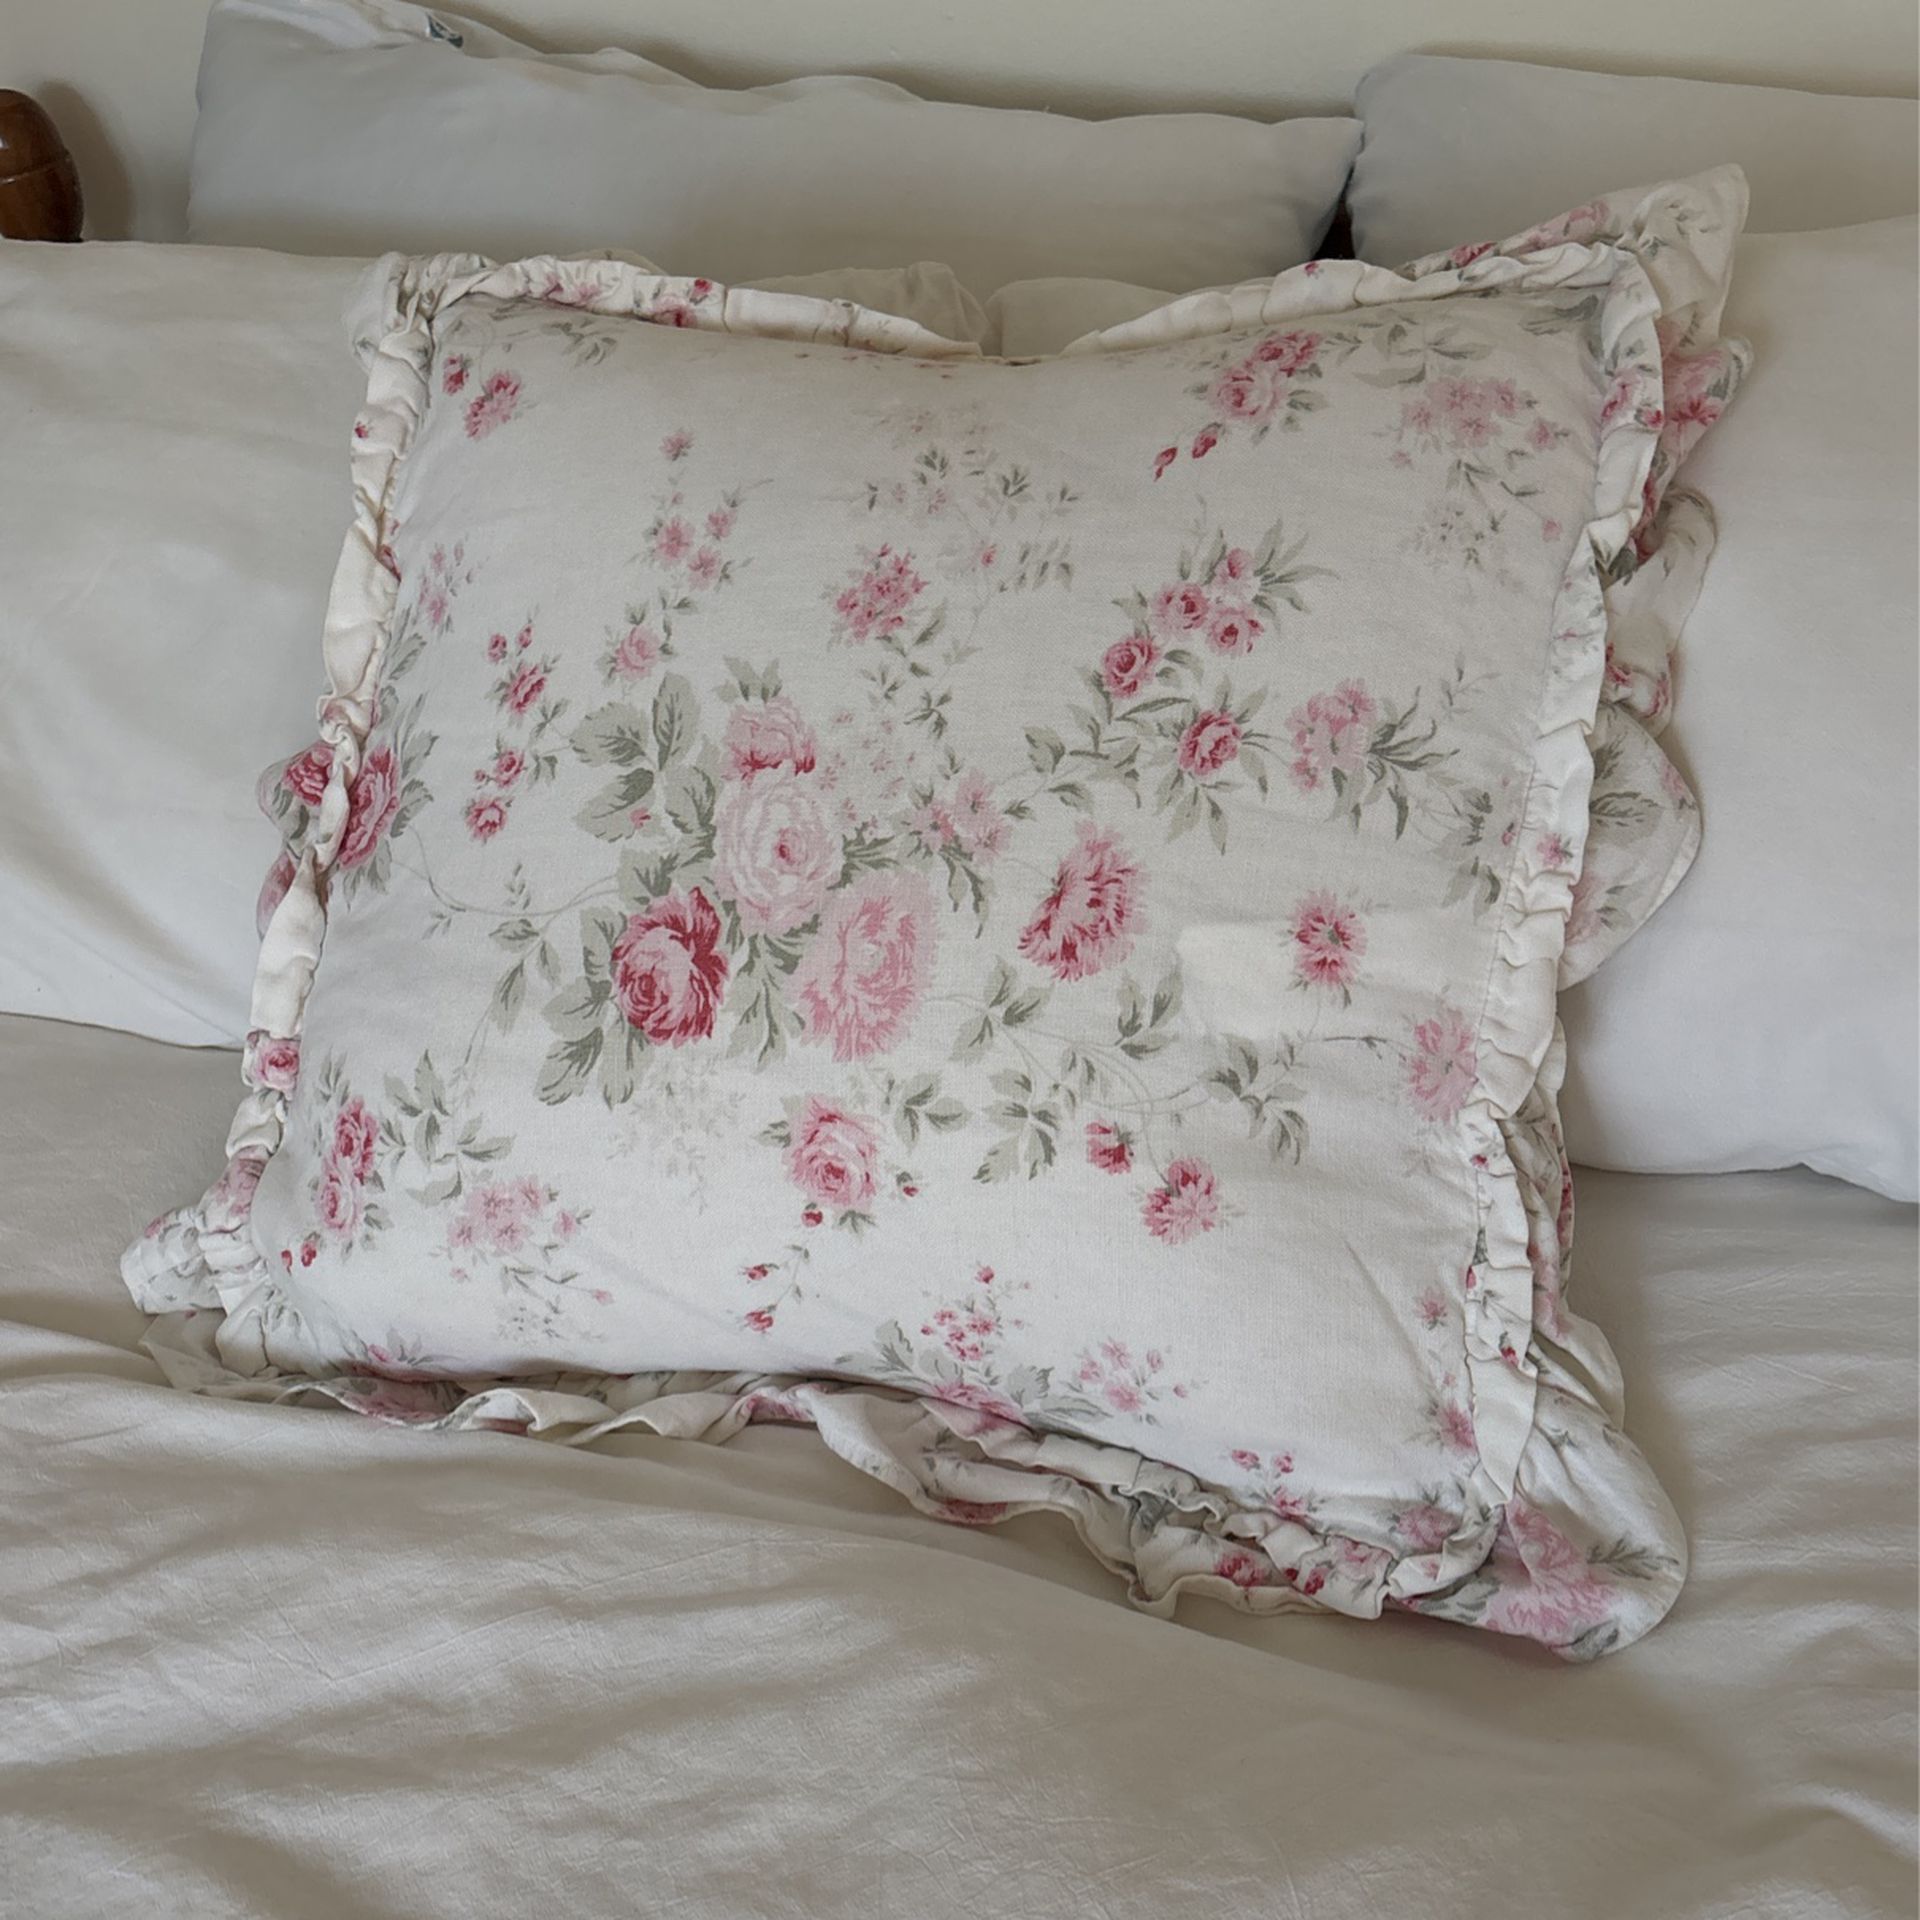 Shabby Chic Vintage Feathered Rose Pillow 